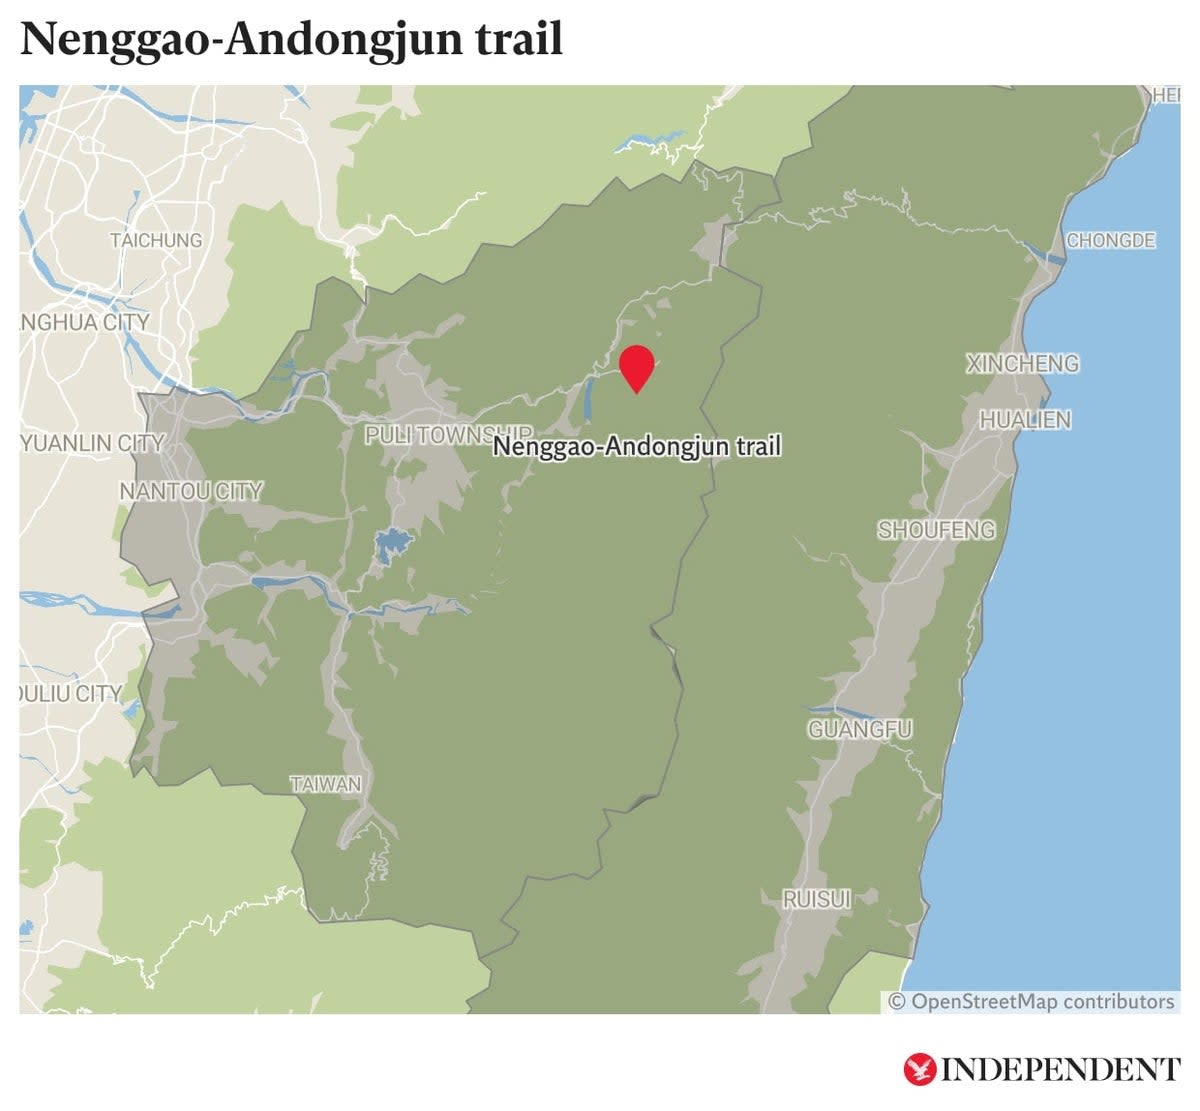 Missing American hiker found dead on the Nenggao-Andongjun trail in central Taiwan (The Independent/ Datawrapper)